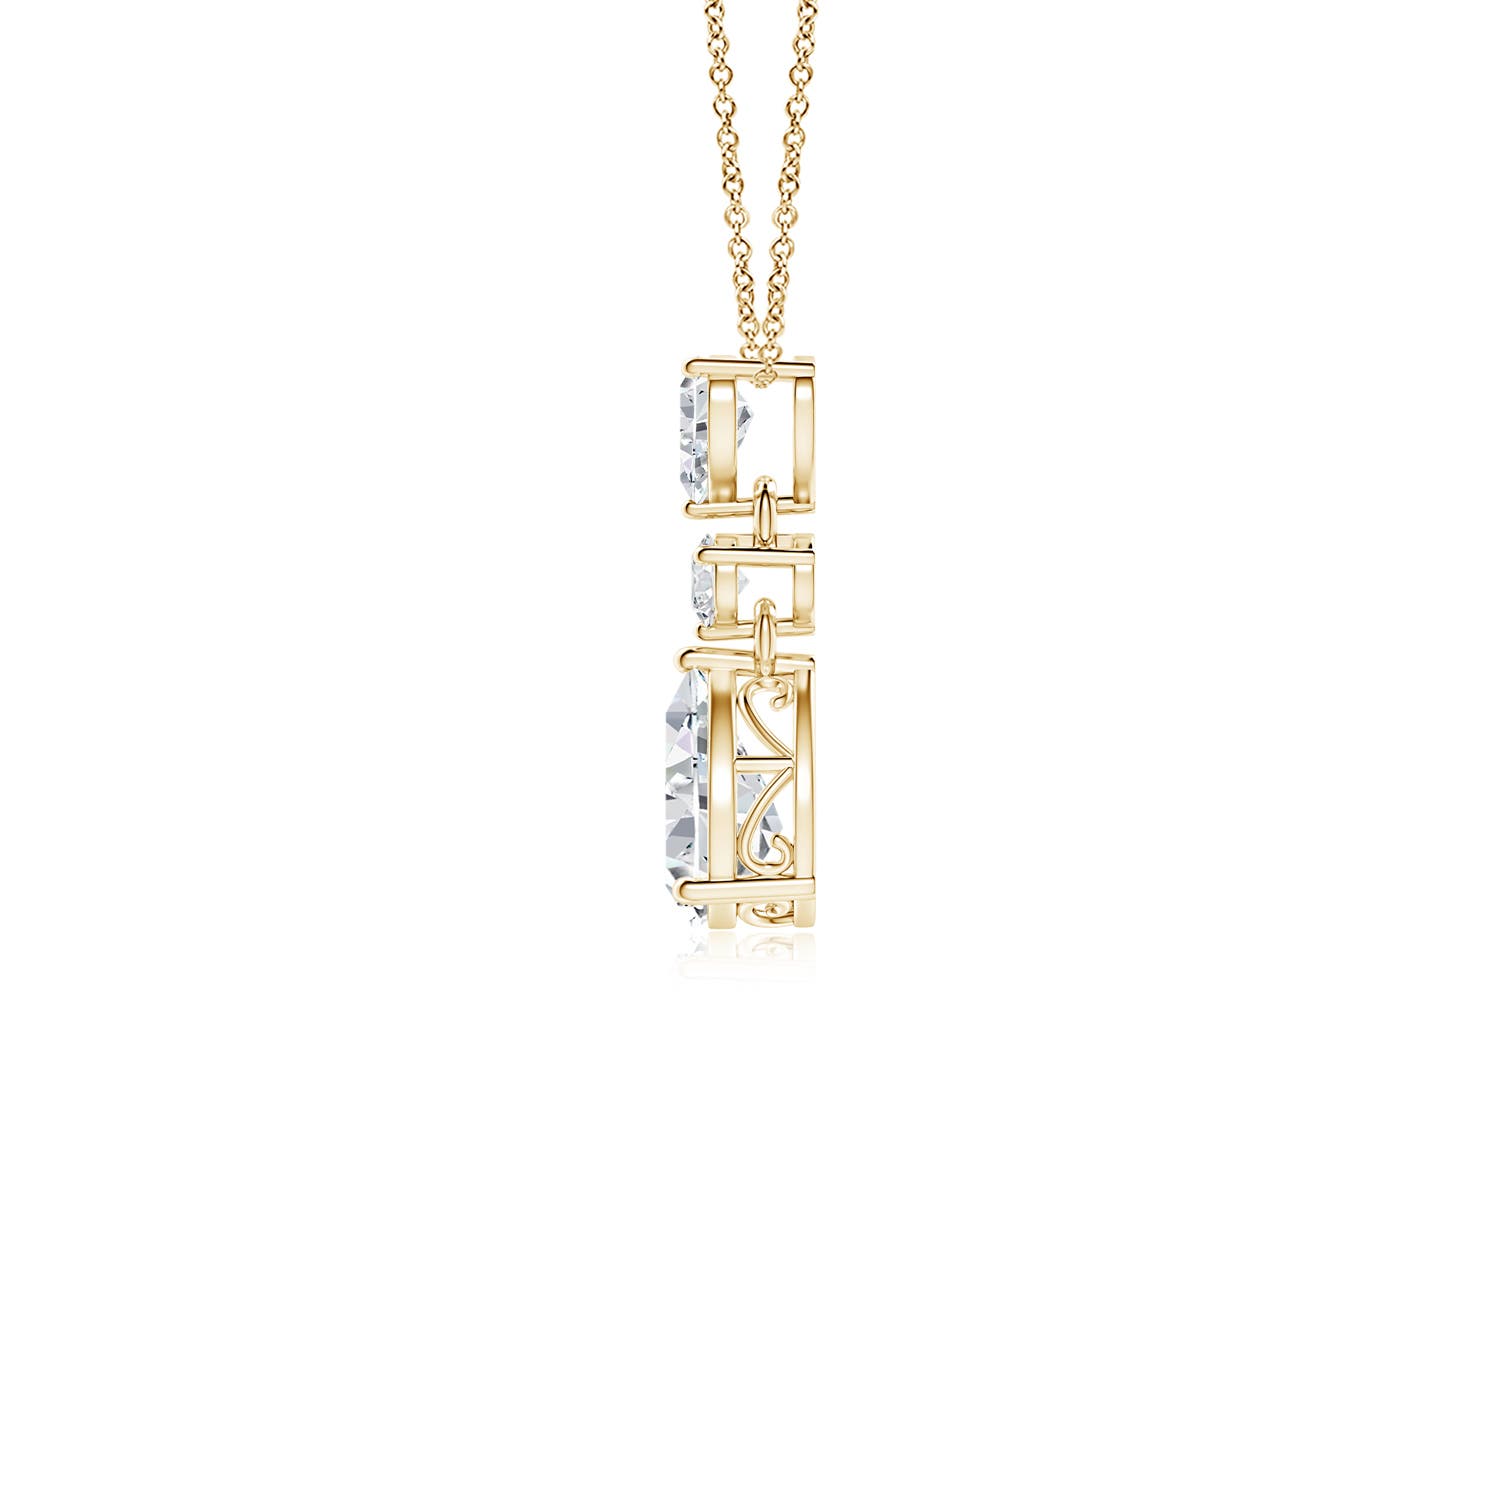 H, SI2 / 0.93 CT / 14 KT Yellow Gold